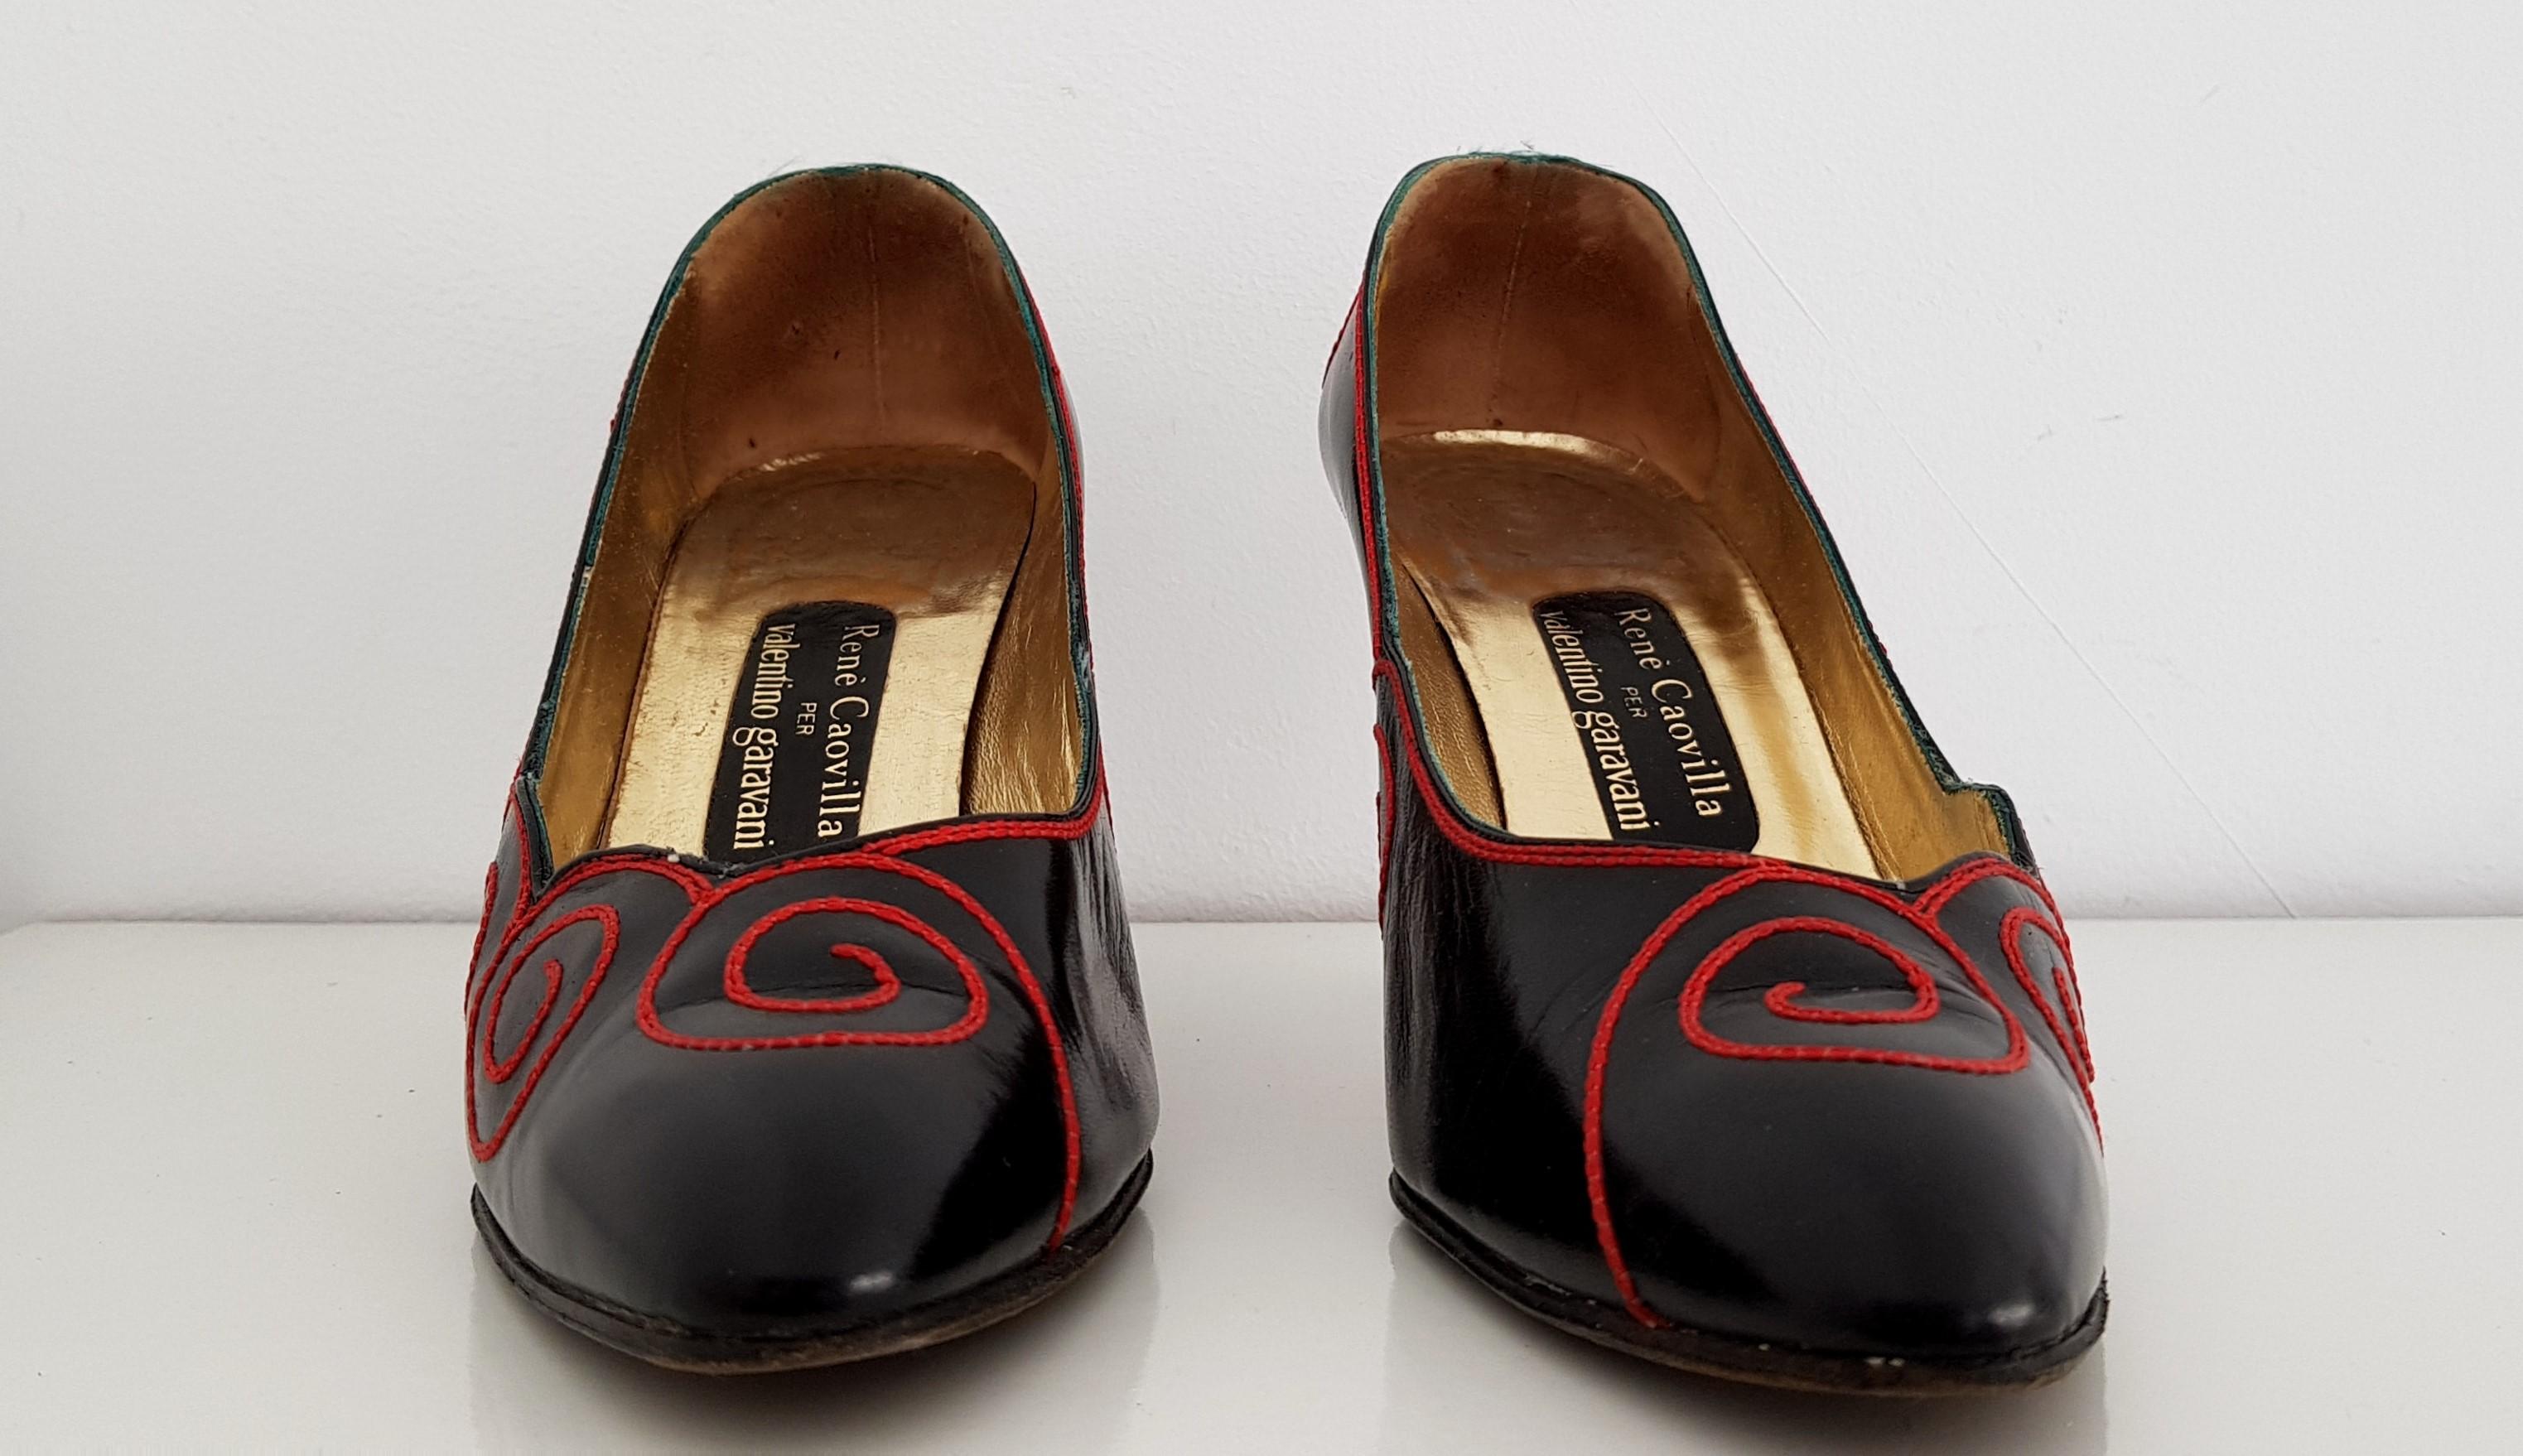 Designed by René Caovilla for Valentino Garavani.
Black with Red spirals Leather Heels. 
Limited and Rare Edition.

Conditions: Perfect conditions on the outside with some signs of wear on the inside and on the sole of the shoe.

Heel height: 8